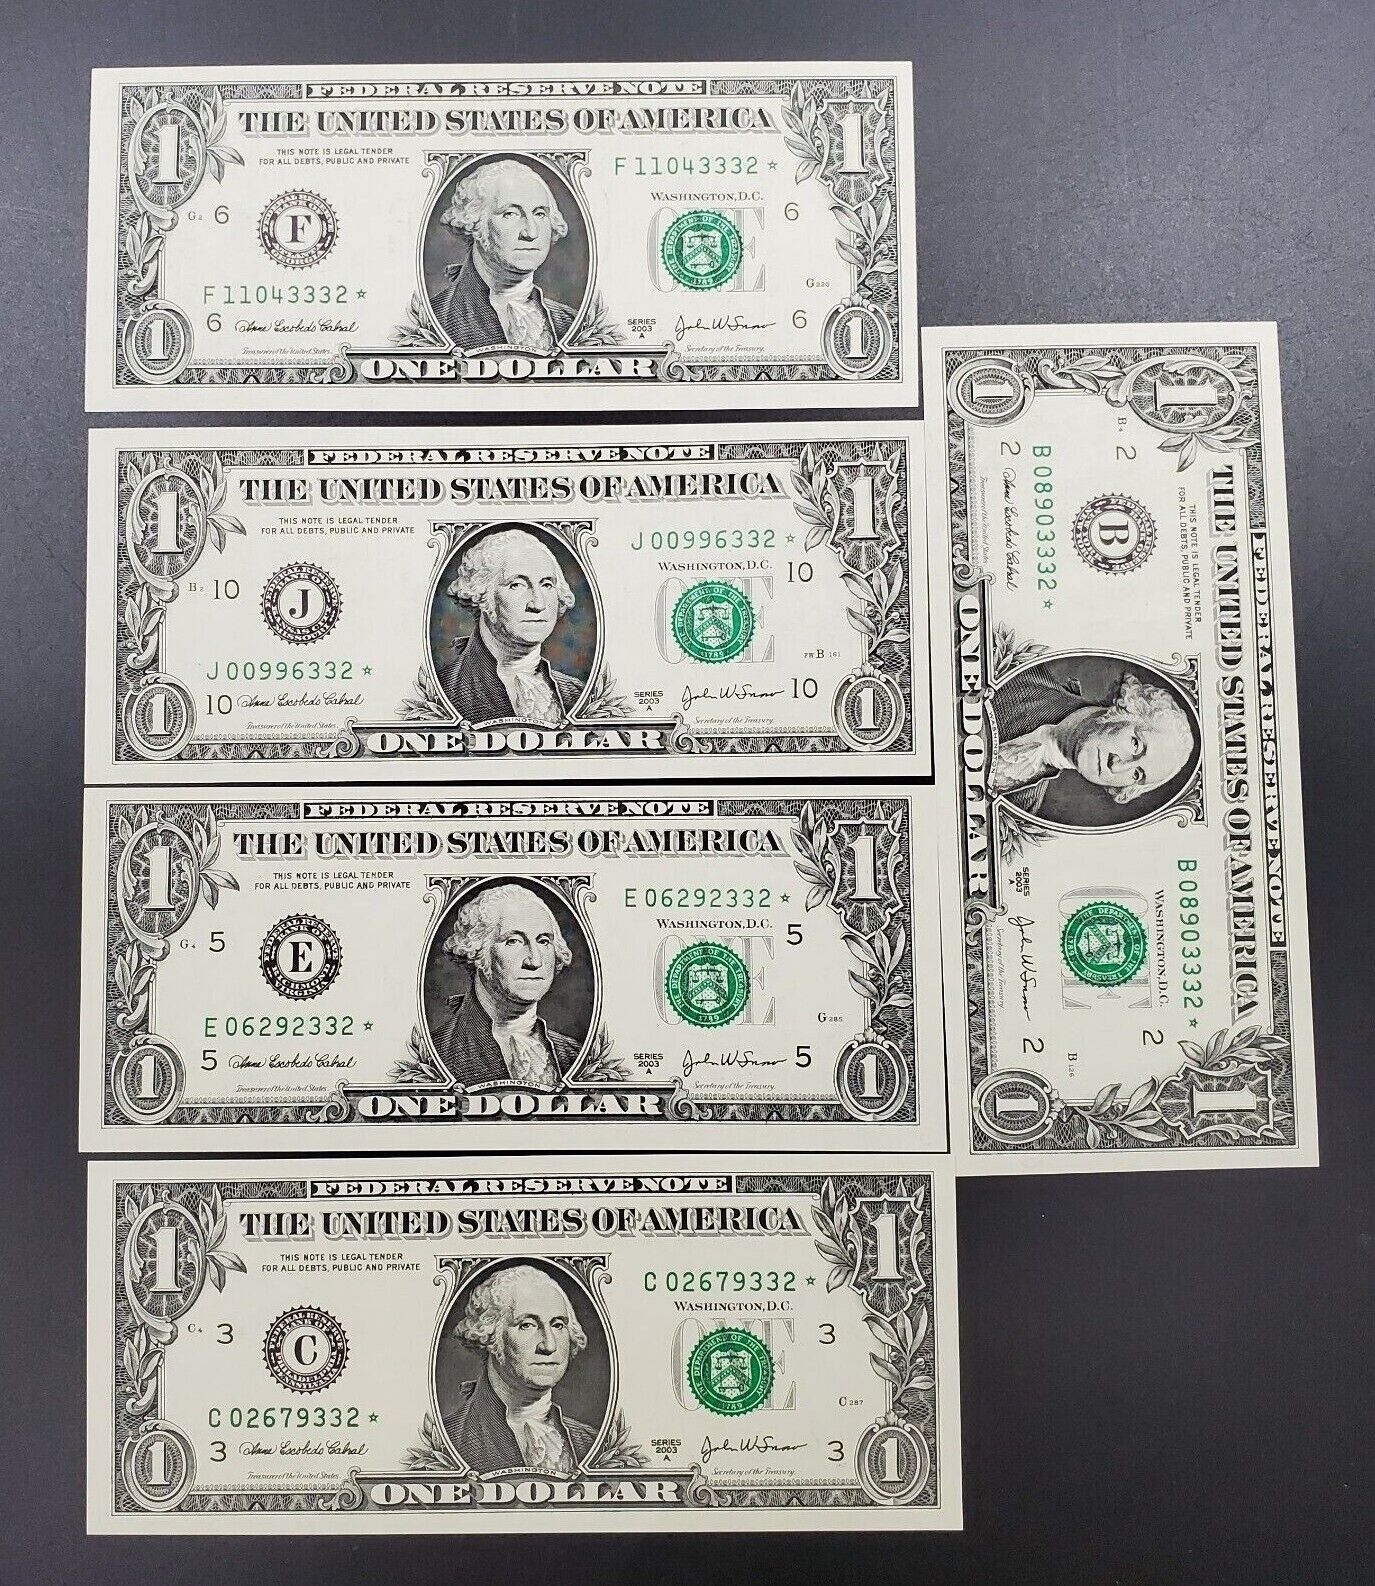 SERIES 2003 A $1 FRN FEDERAL RESERVE NOTE UNC STAR * ALL END IN 332 Serial #s